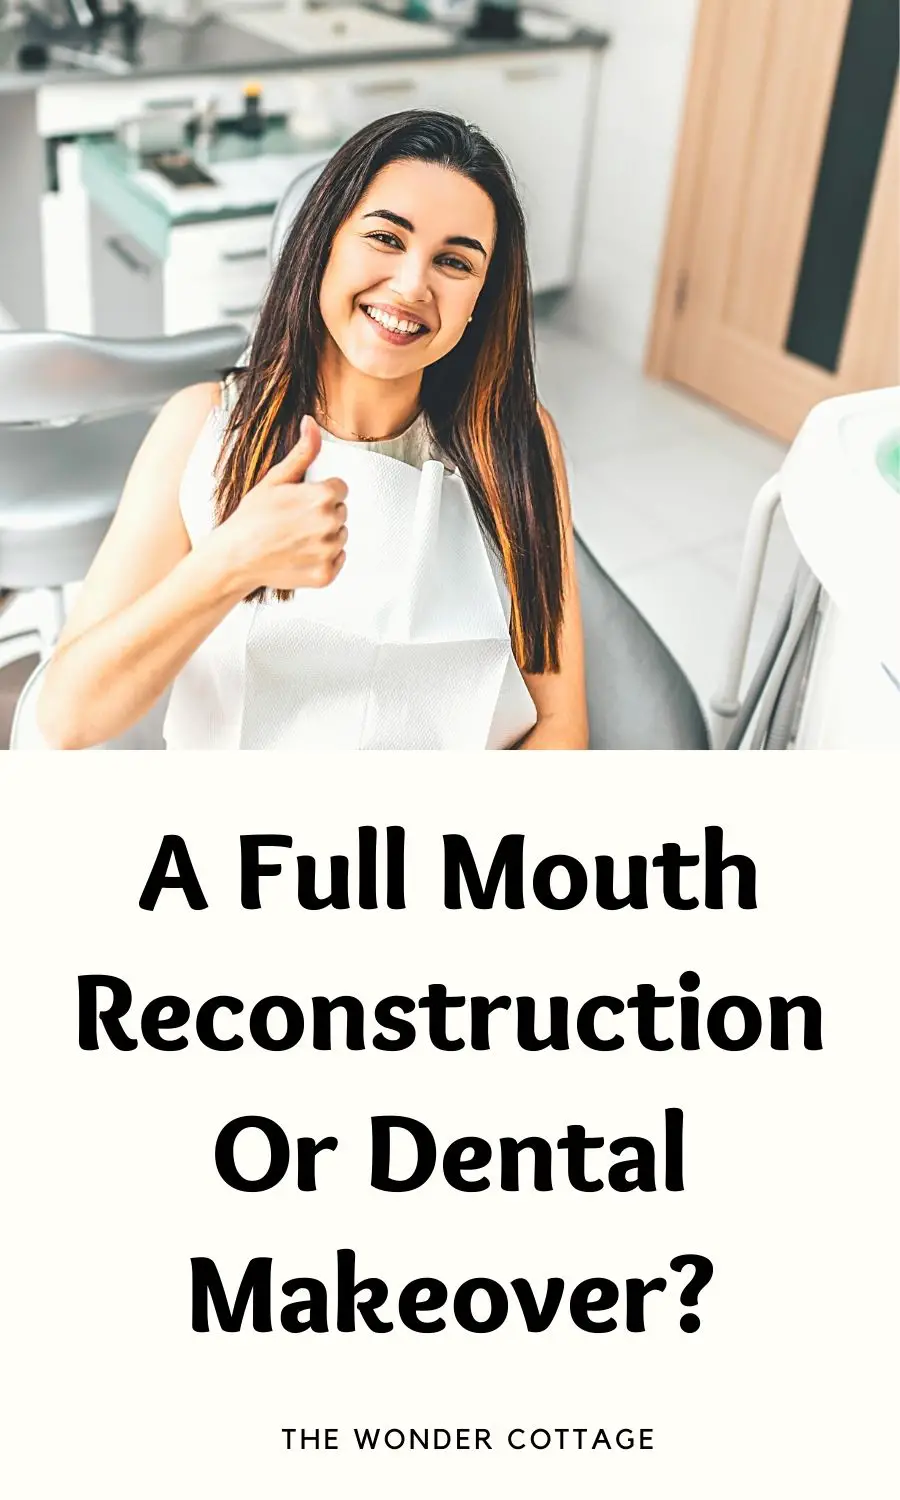 A Full Mouth Reconstruction Or Dental Makeover?